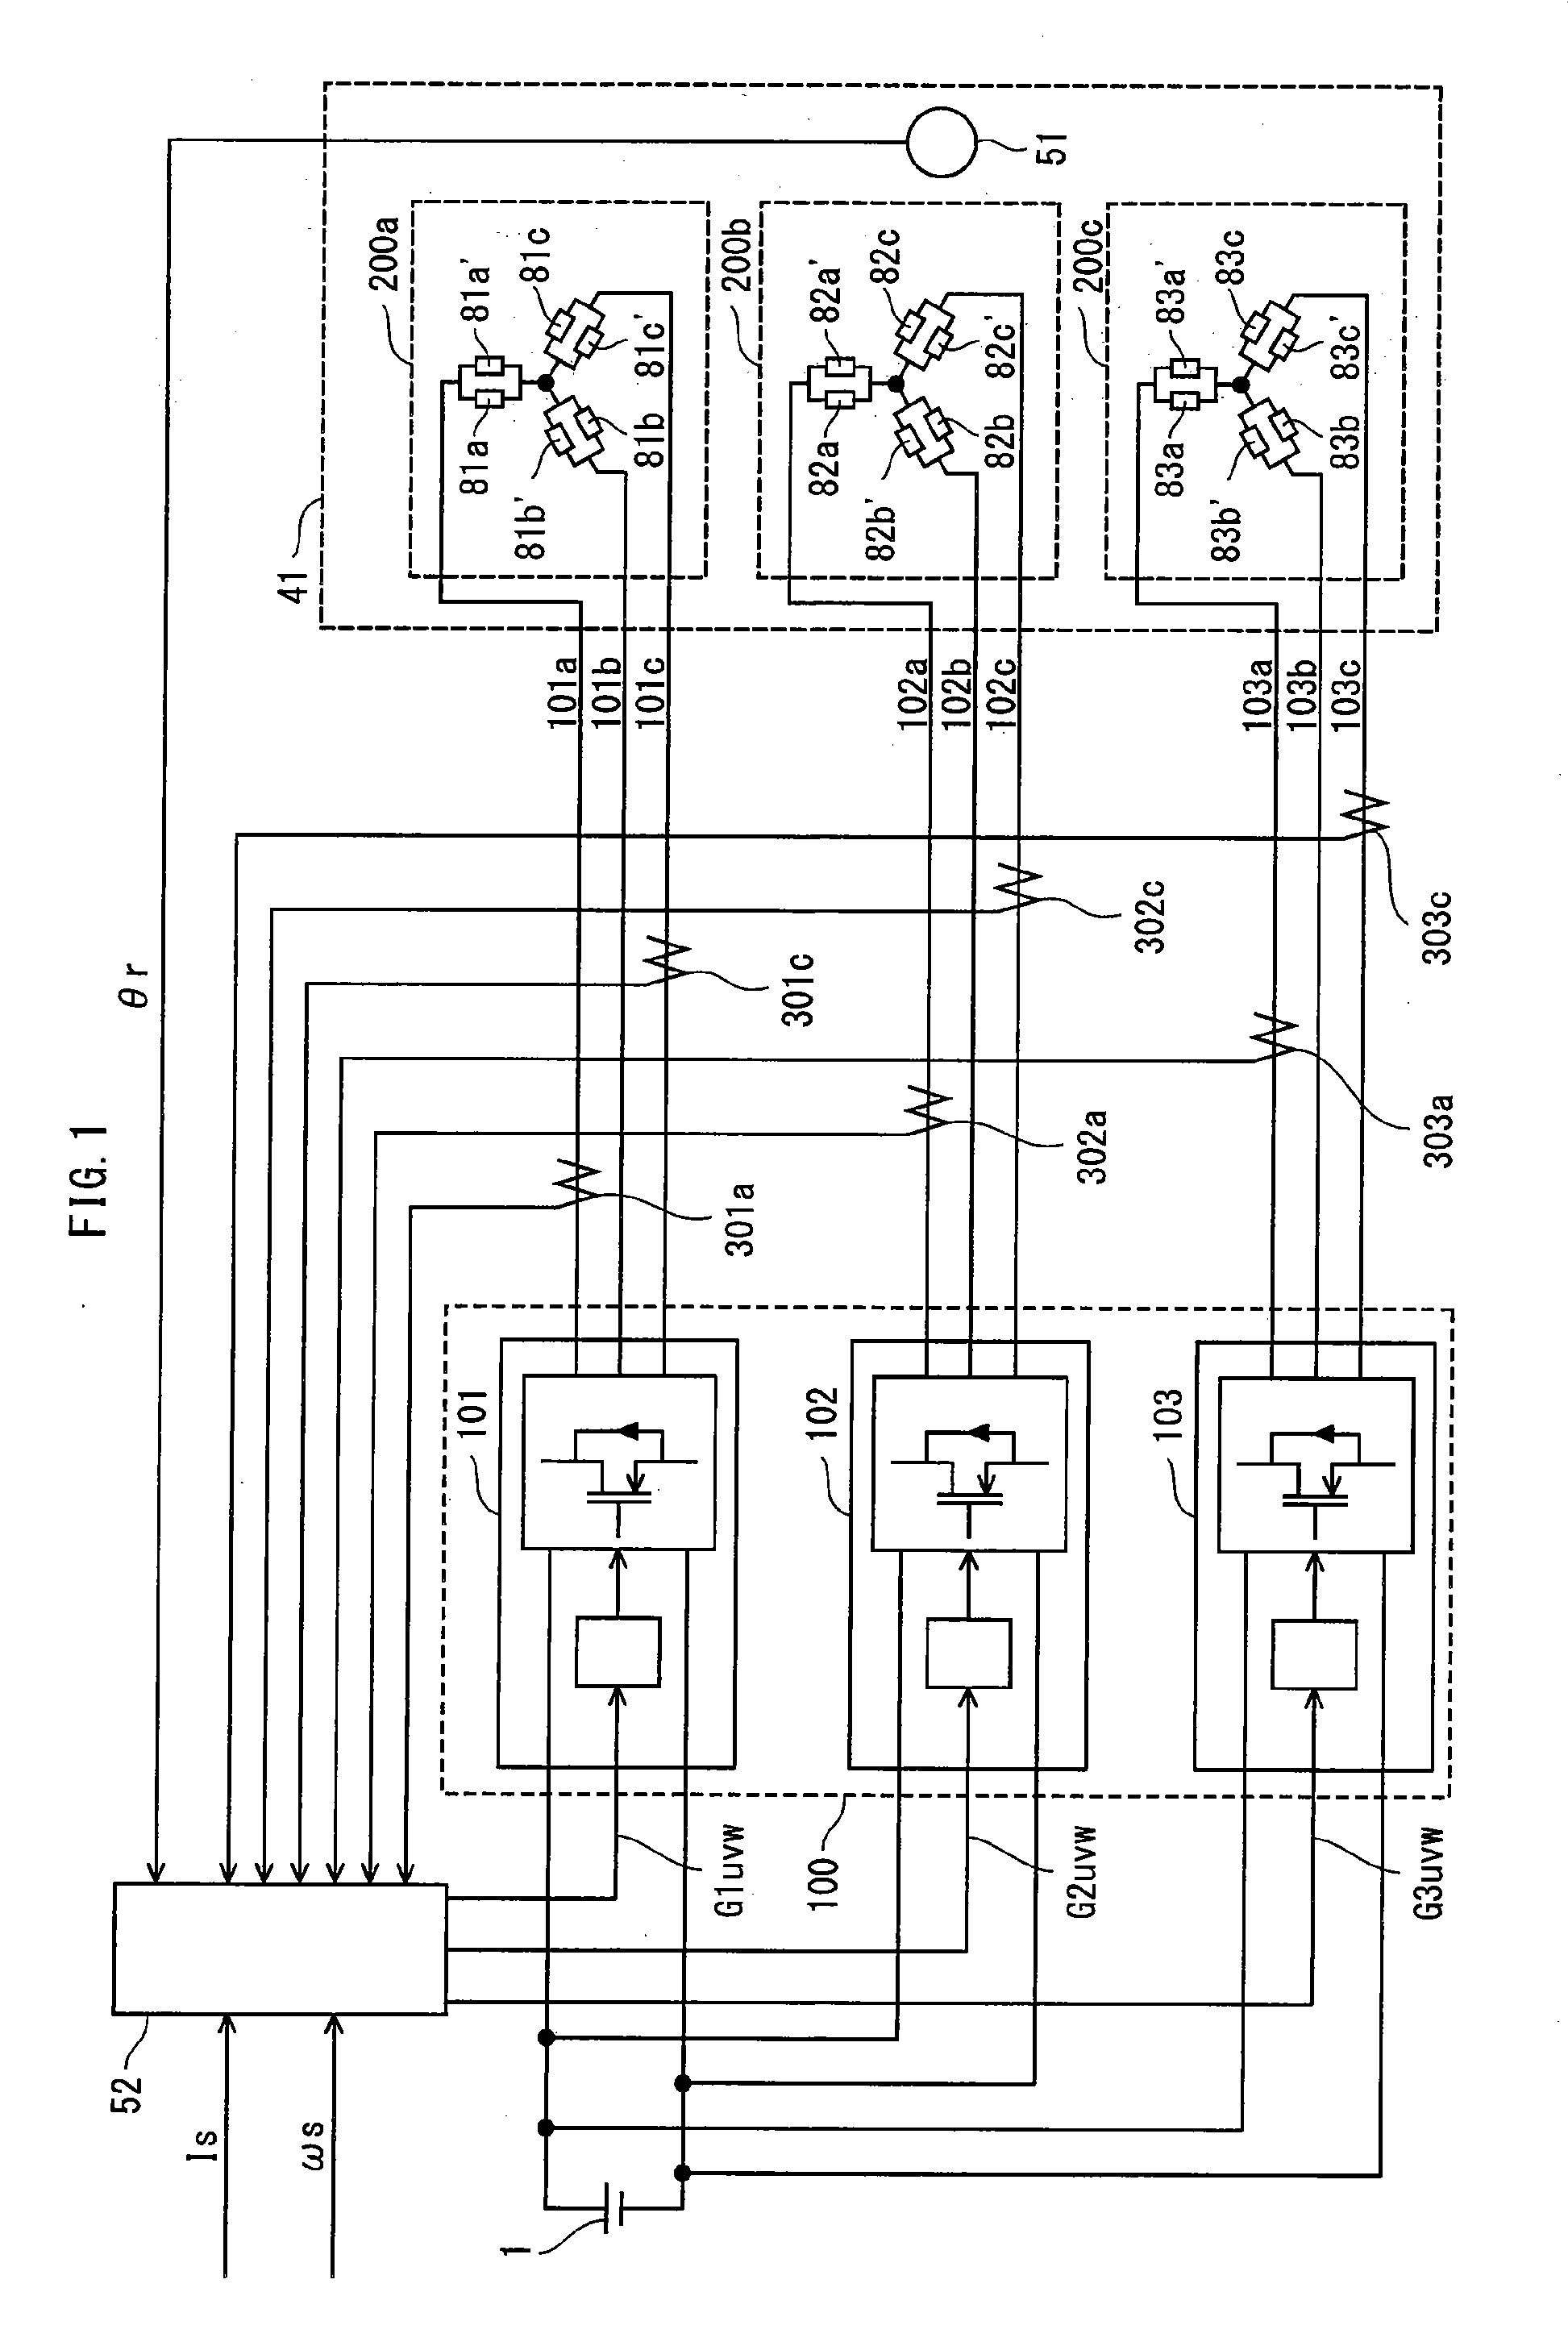 Synchronous electric motor drive system